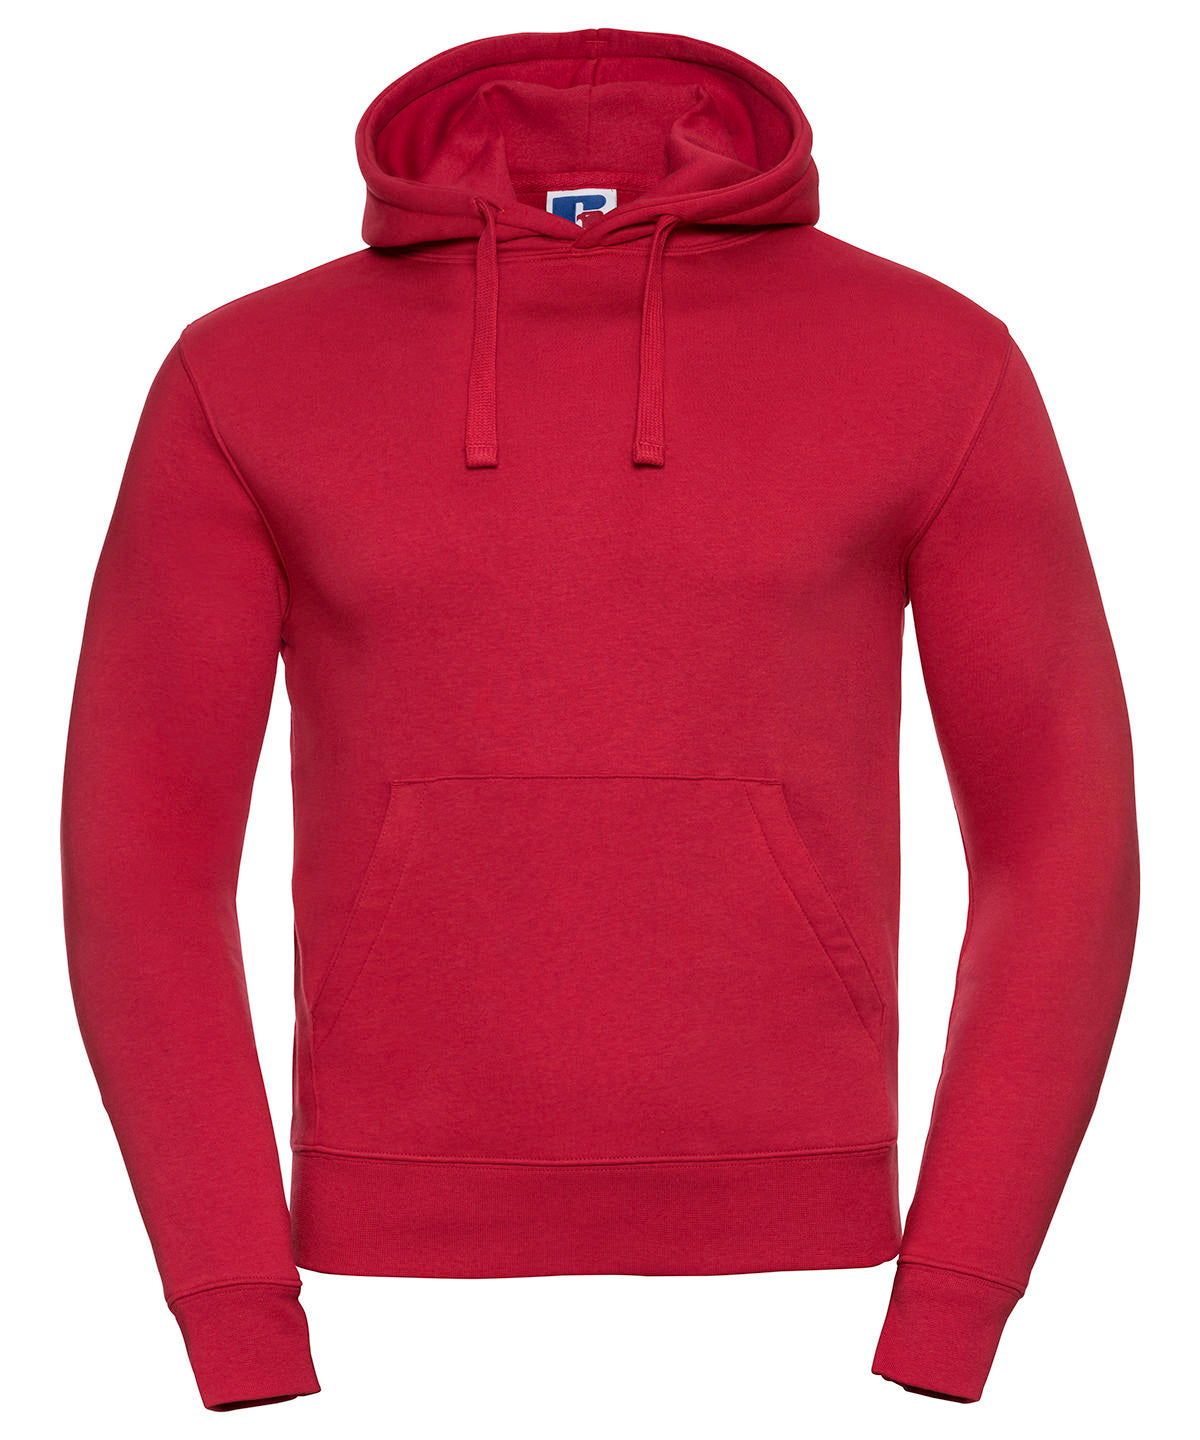 Russell Authentic Hooded Sweatshirt Classic Red